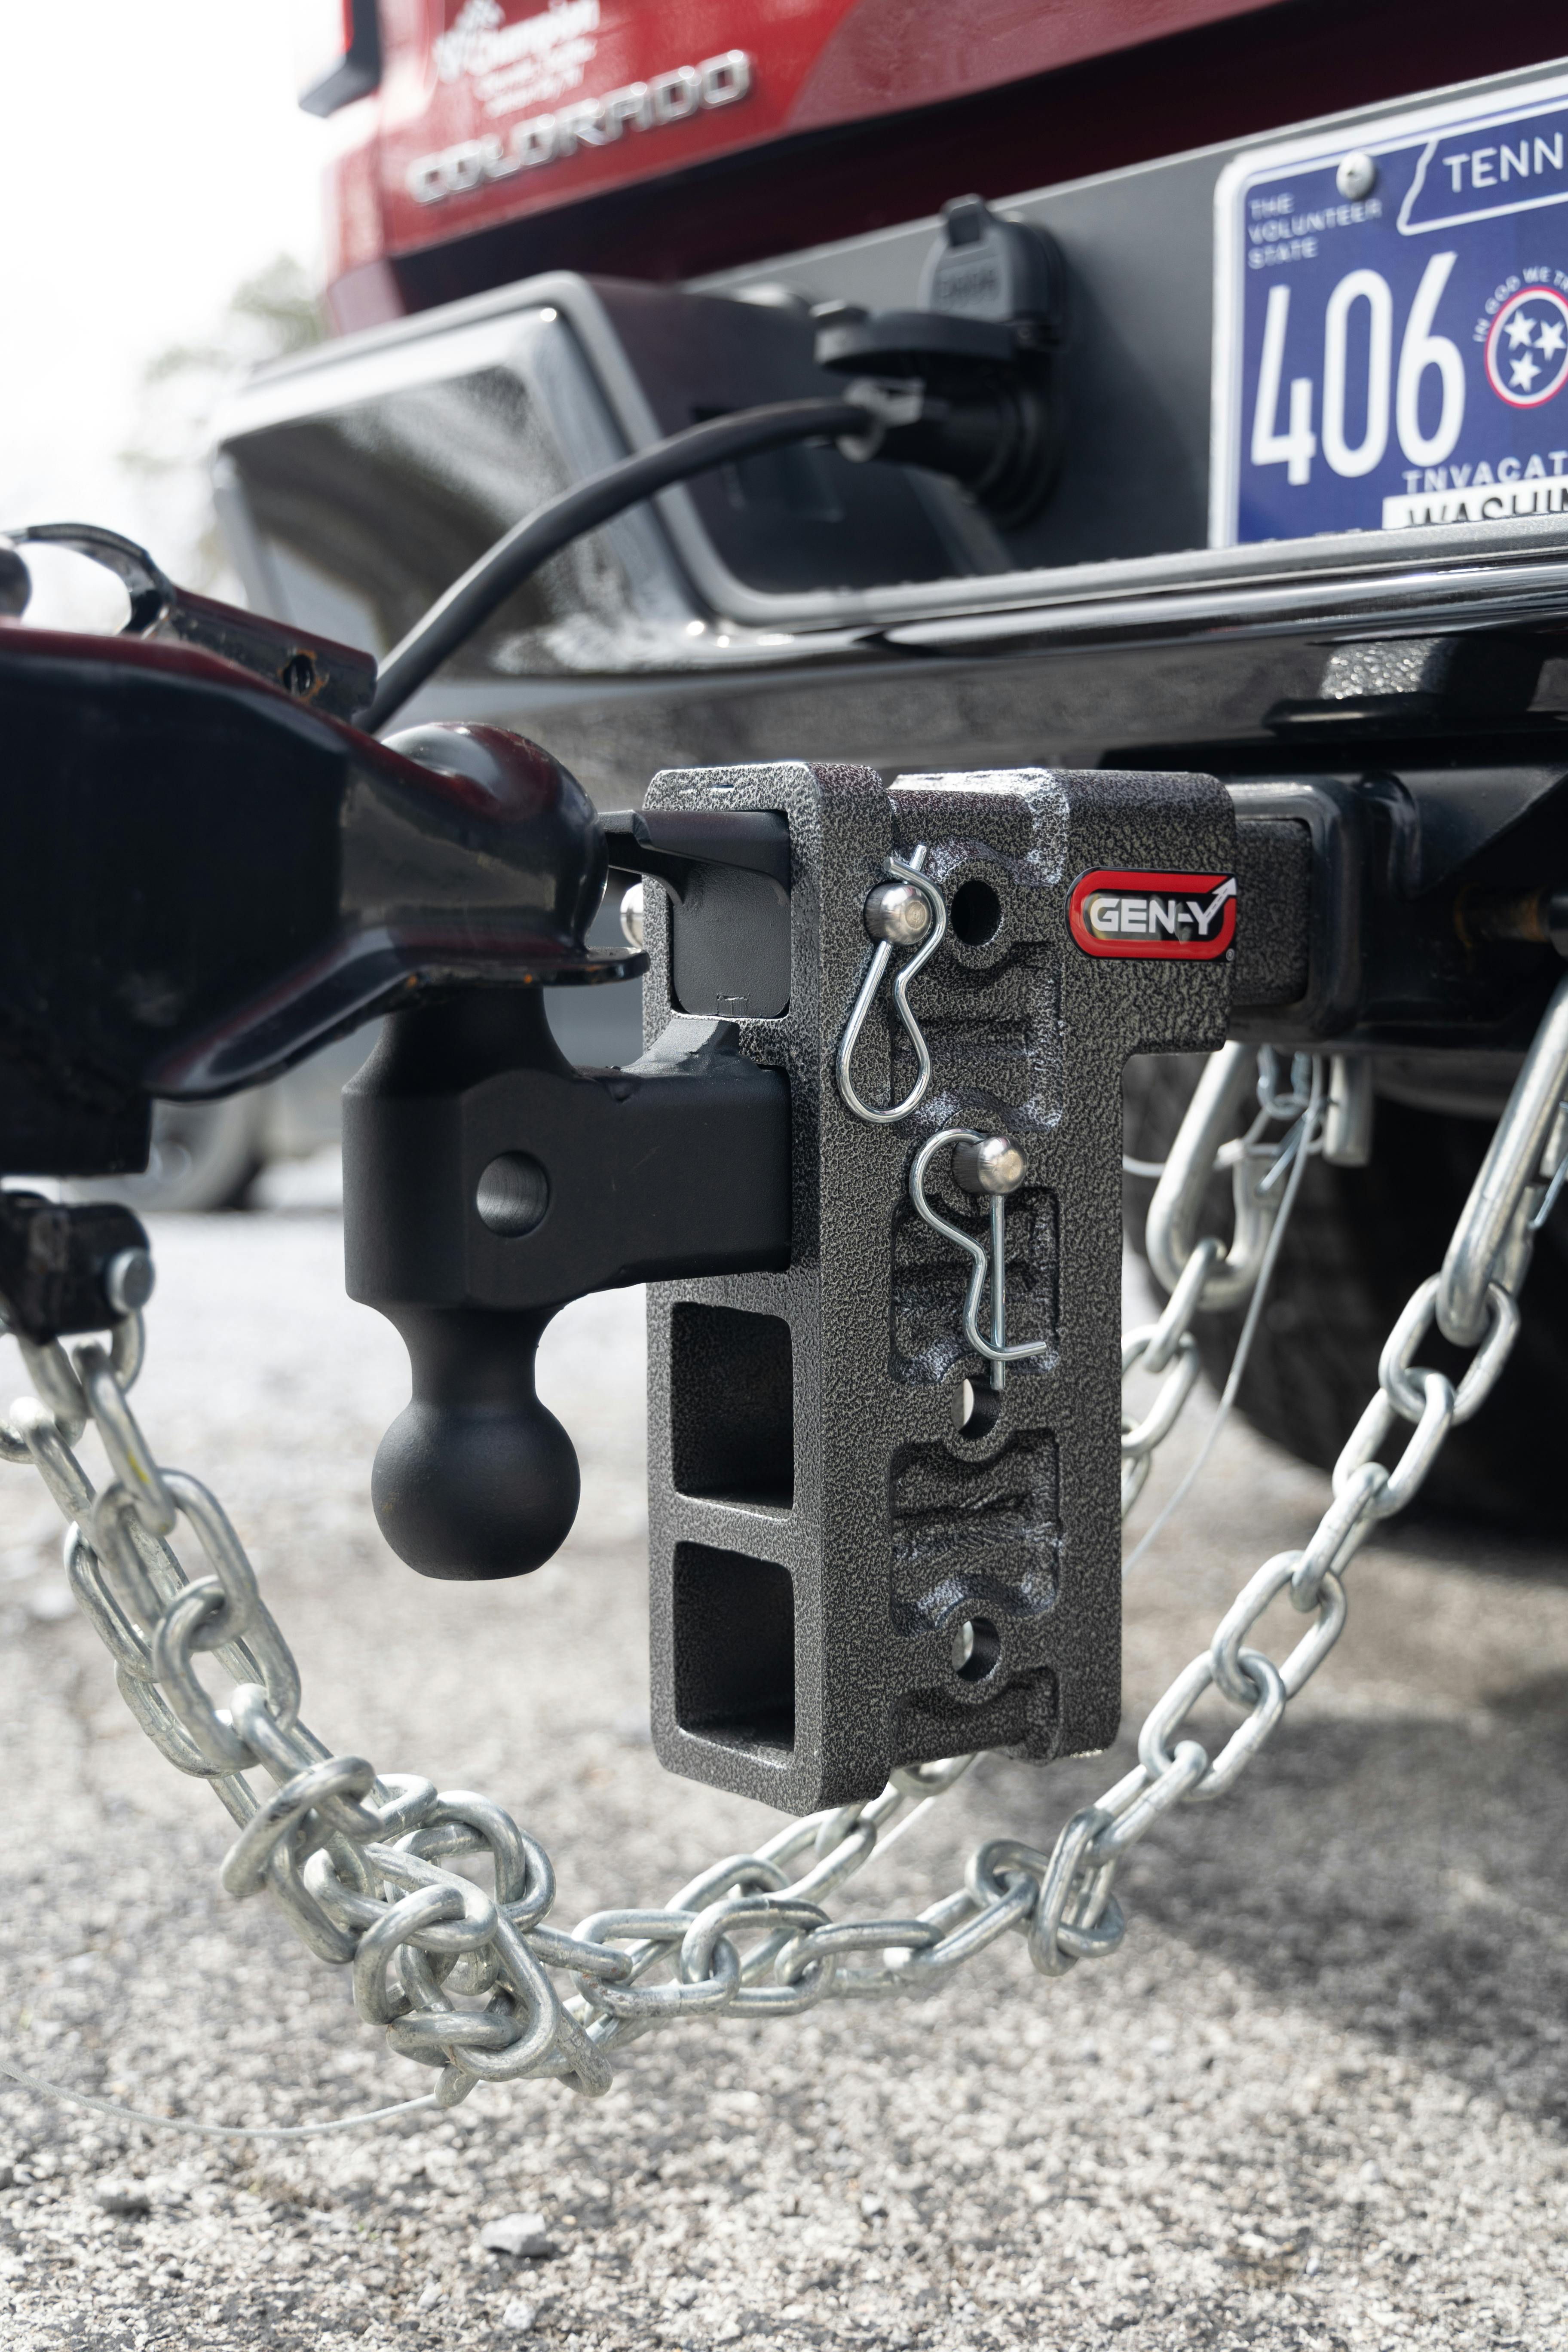 GEN-Y Hitch GH-524 Mega-Duty 2in Shank 7.5in Drop 2K TW 16K Hitch and GH-051 Dual-Ball and GH-032